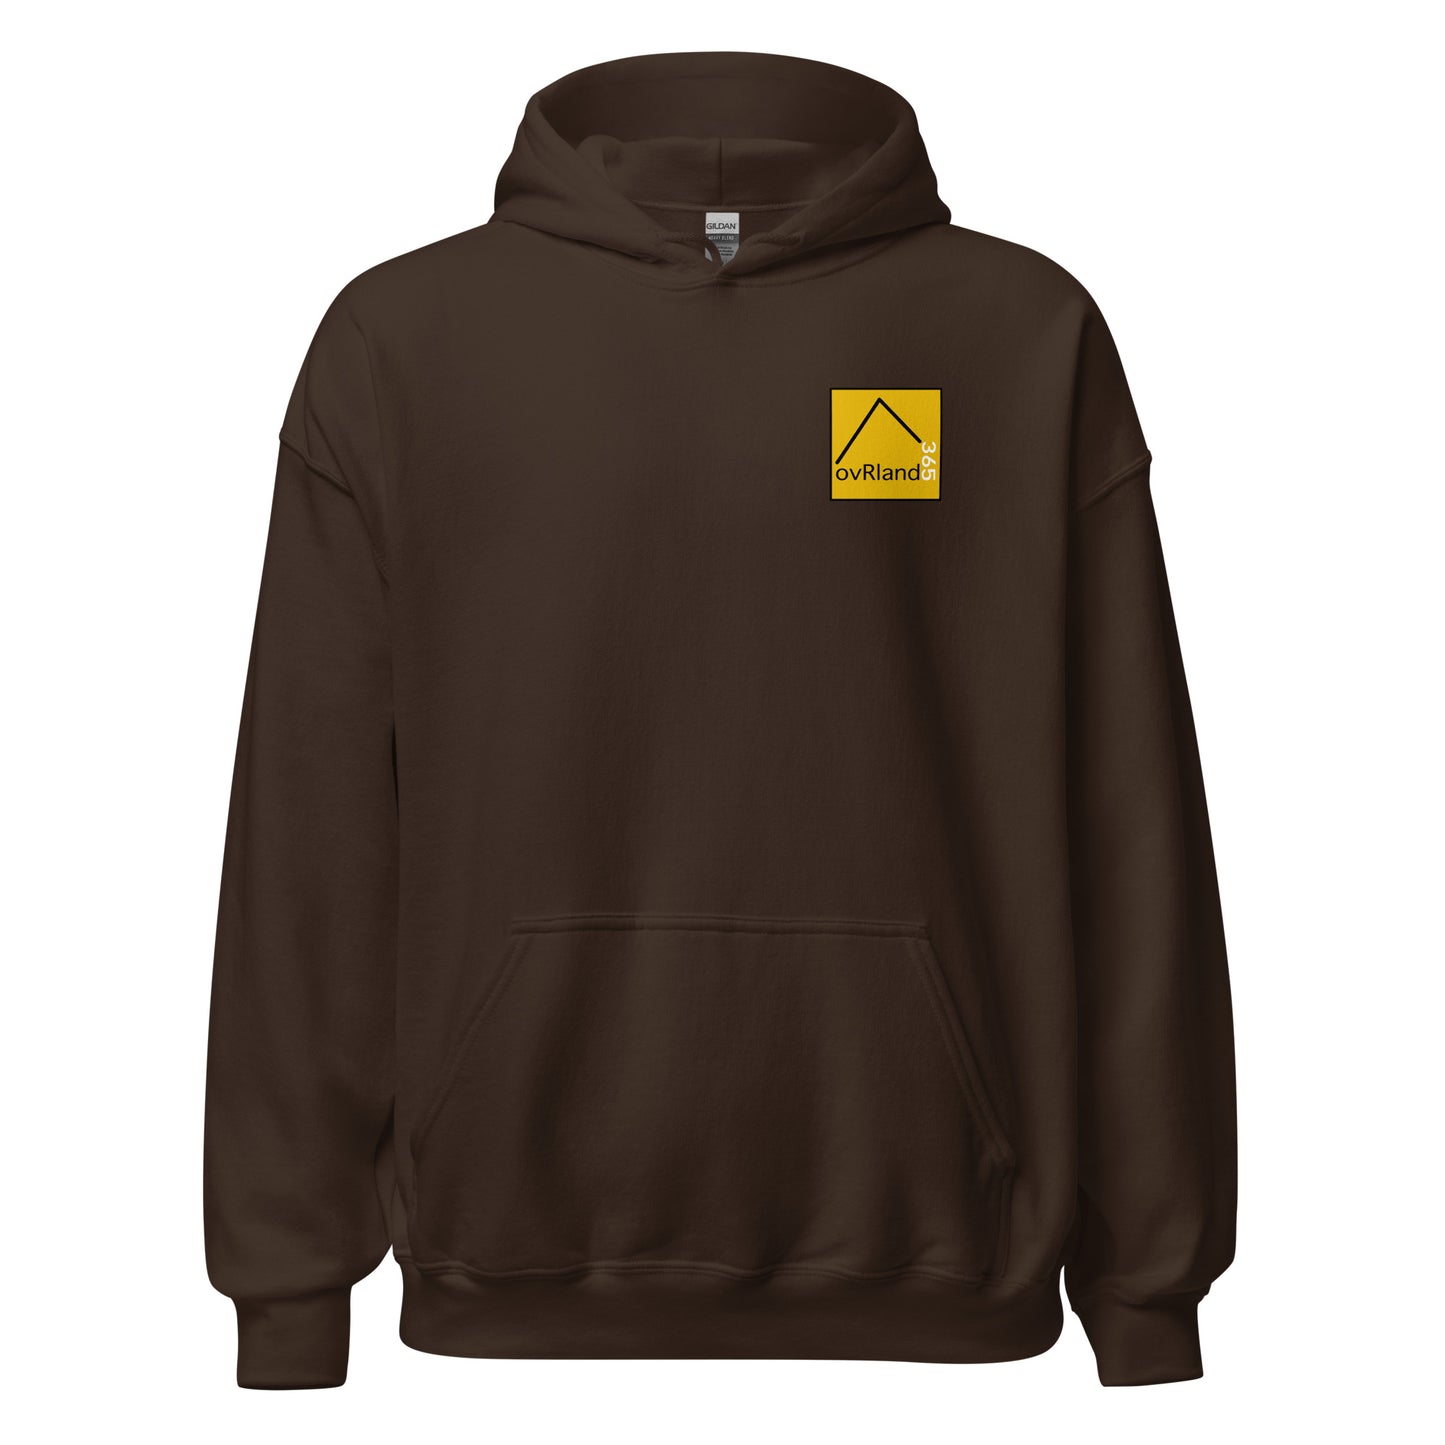 Overland-ology Hoodie. The study of road-trips and camping. Dark Chocolate. Front View. overland365.com